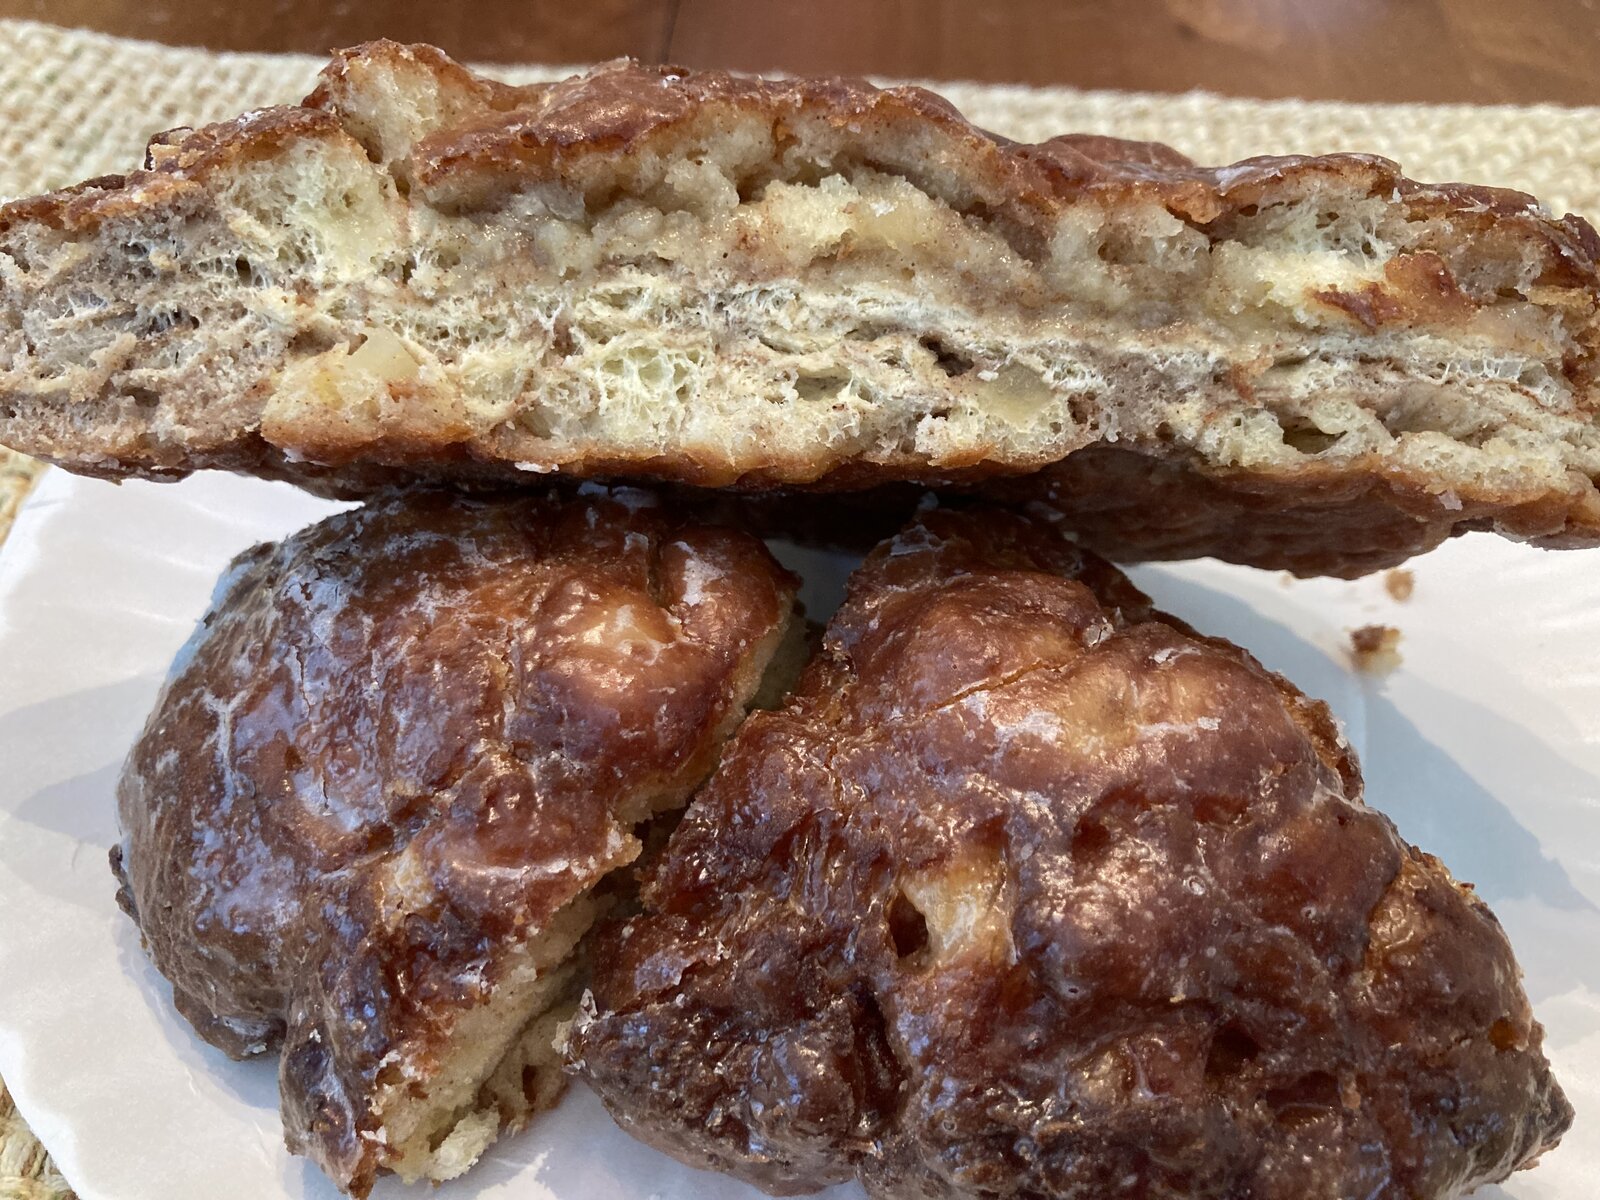 Apple Fritter From The Donut Shop's Food Truck